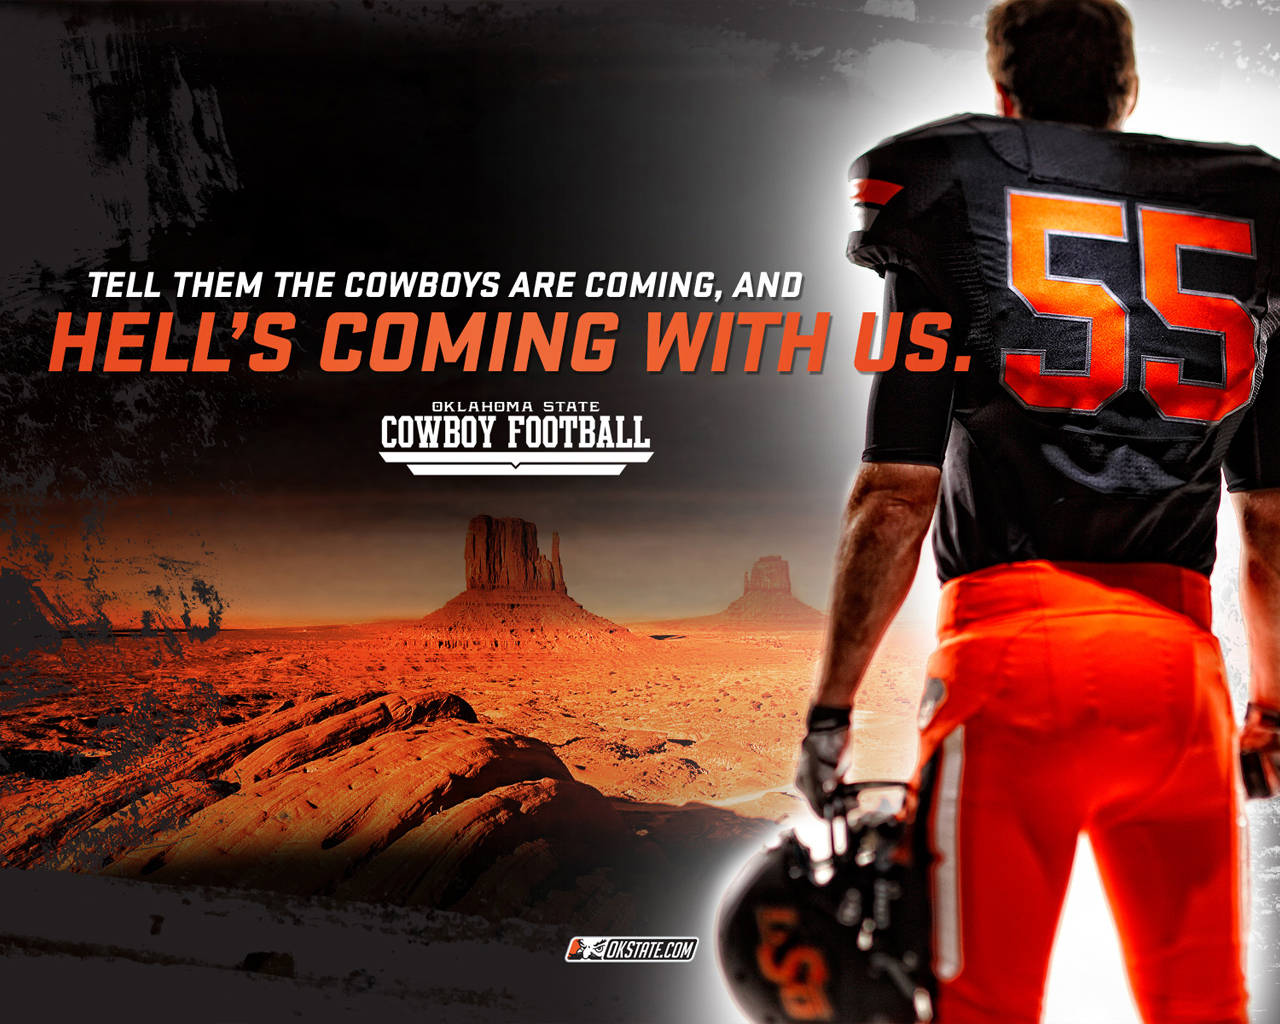 Osuni Tracker Wallpaper Oklahoma State Official Athletic Site